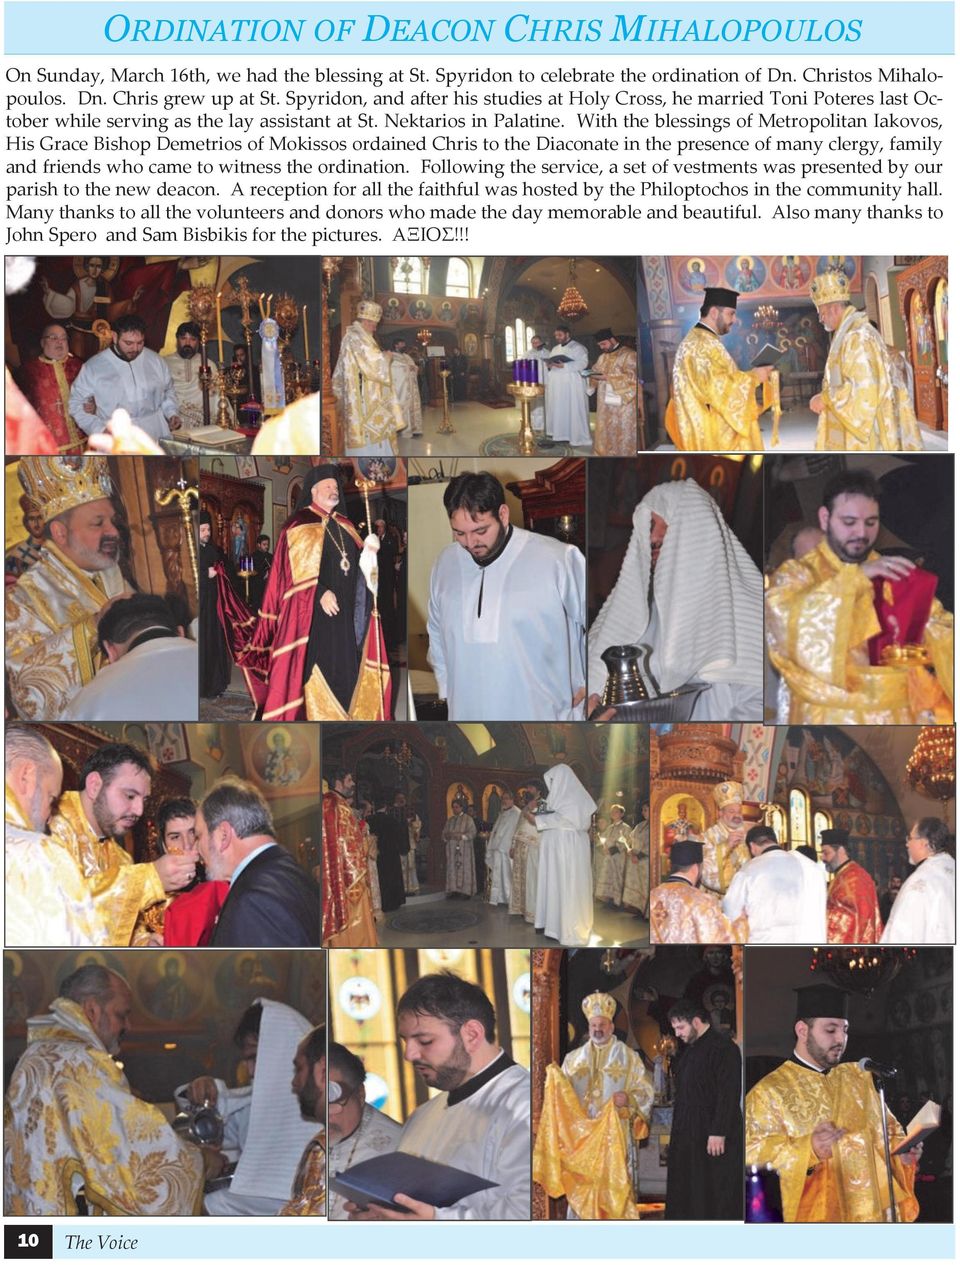 With the blessings of Metropolitan Iakovos, His Grace Bishop Demetrios of Mokissos ordained Chris to the Diaconate in the presence of many clergy, family and friends who came to witness the